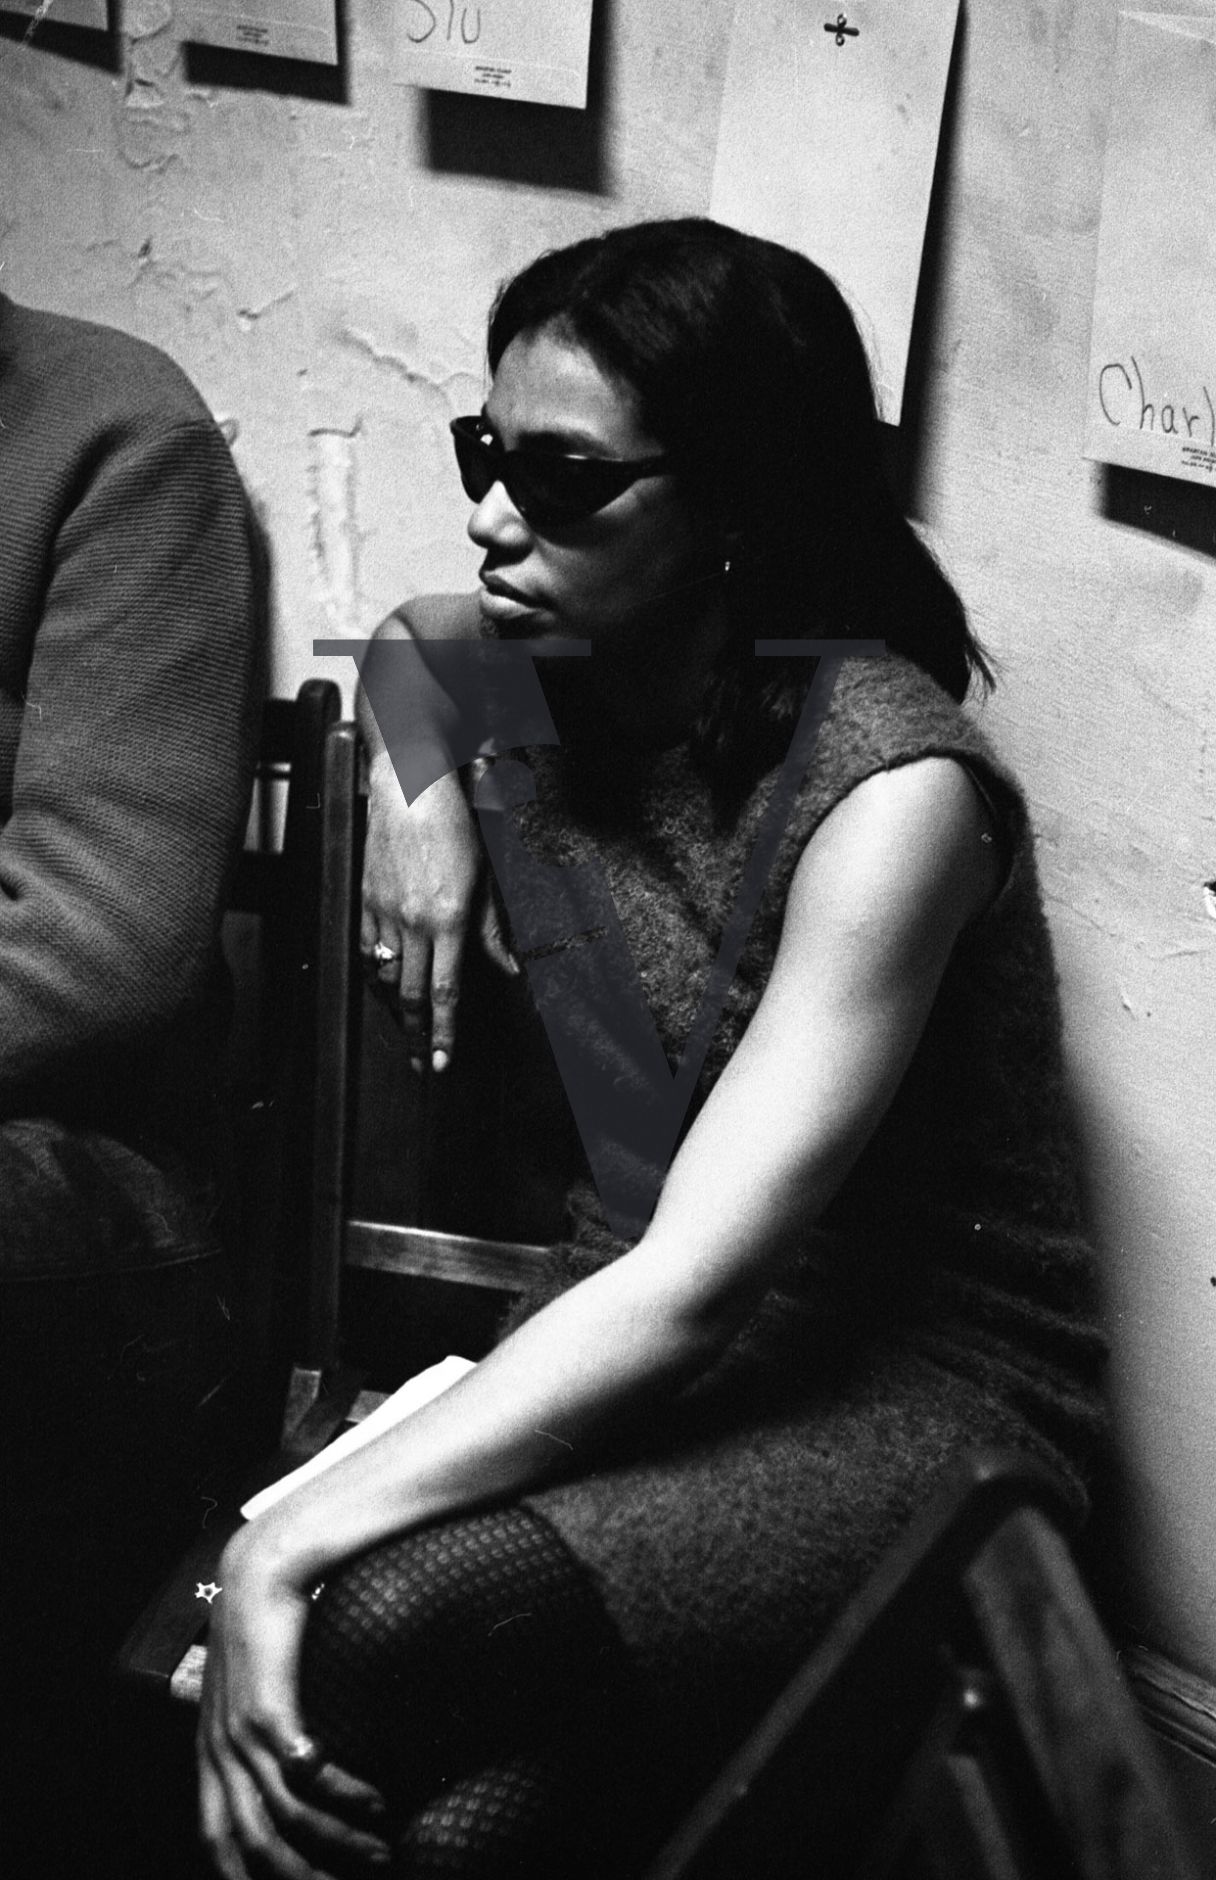 CORE, Congress of Racial Equality, New York woman in shades.